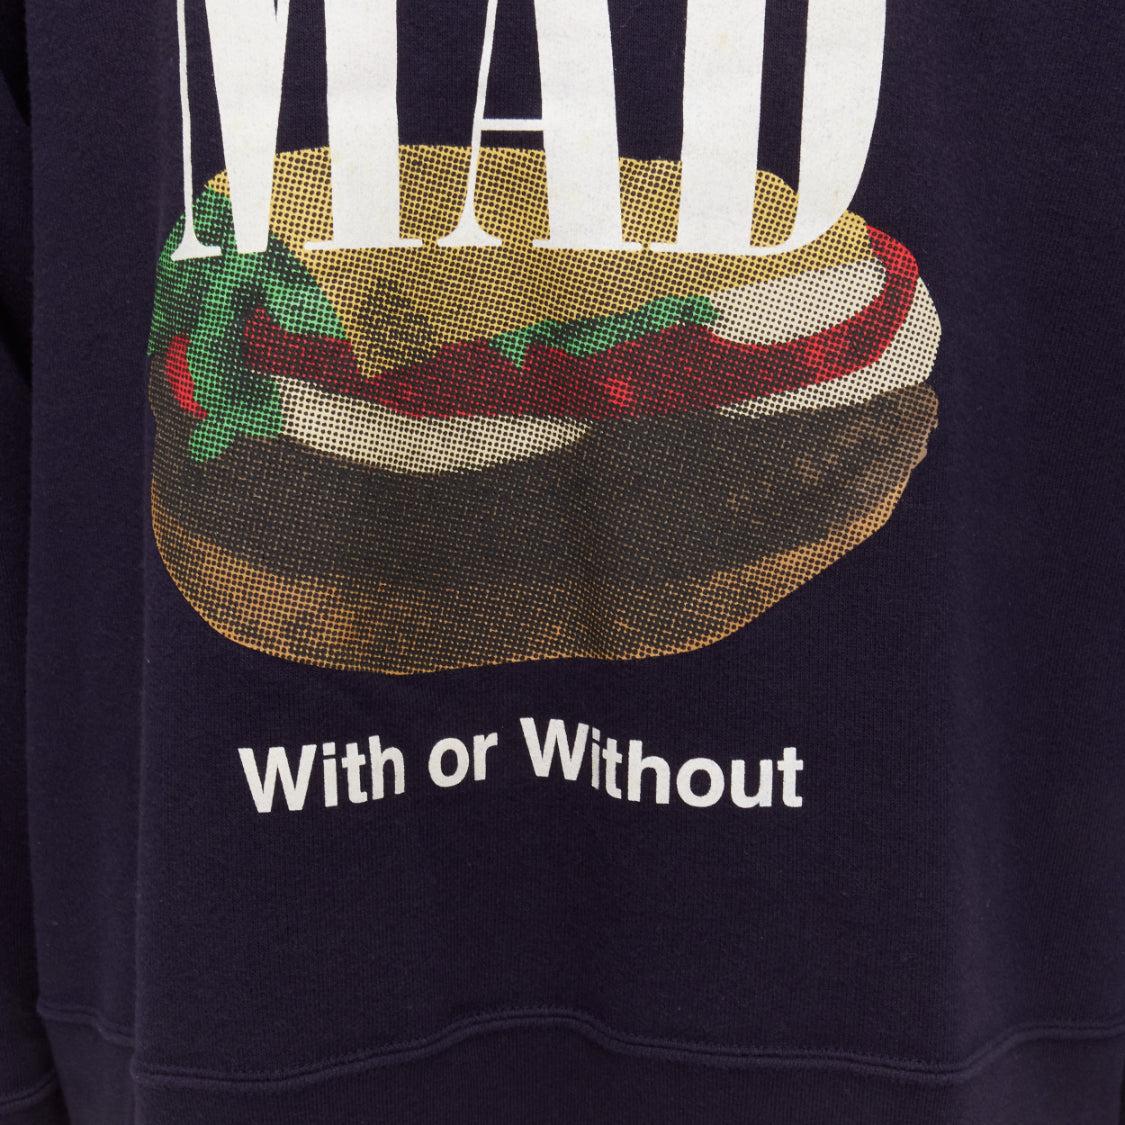 UNDERCOVER 2023 mad burger with without print navy cotton sweater JP3 L
Reference: CAWG/A00256
Brand: Undercover
Collection: 2023
Material: Cotton
Color: Navy
Pattern: Solid
Closure: Pullover
Extra Details: Batwing design.
Made in: